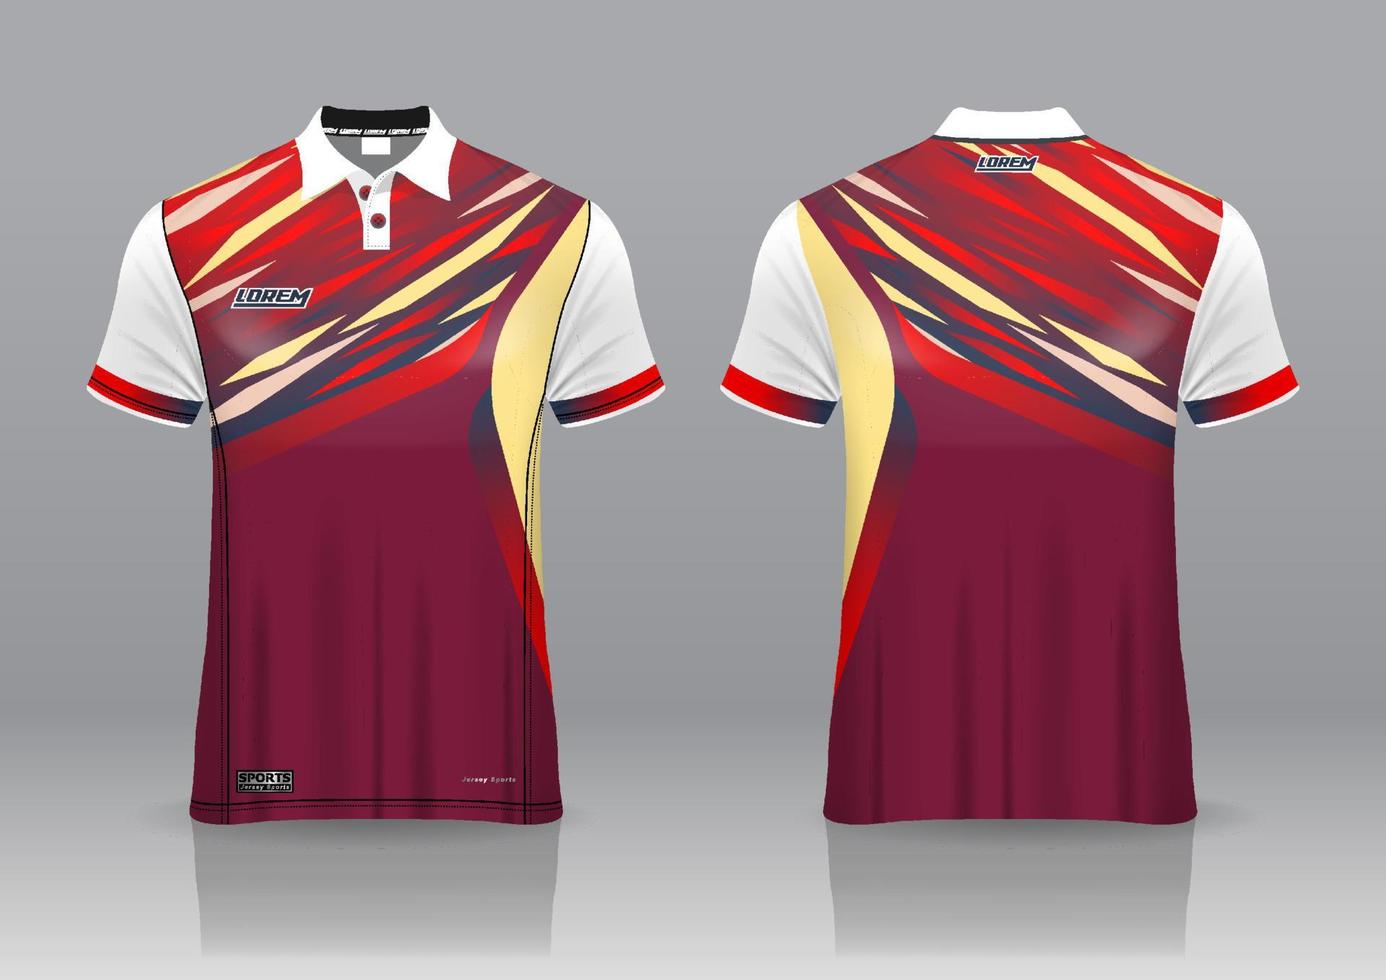 polo shirt uniform design, can be used for badminton, golf in front view, back view. jersey mockup Vector, design premium very simple and easy to customize vector